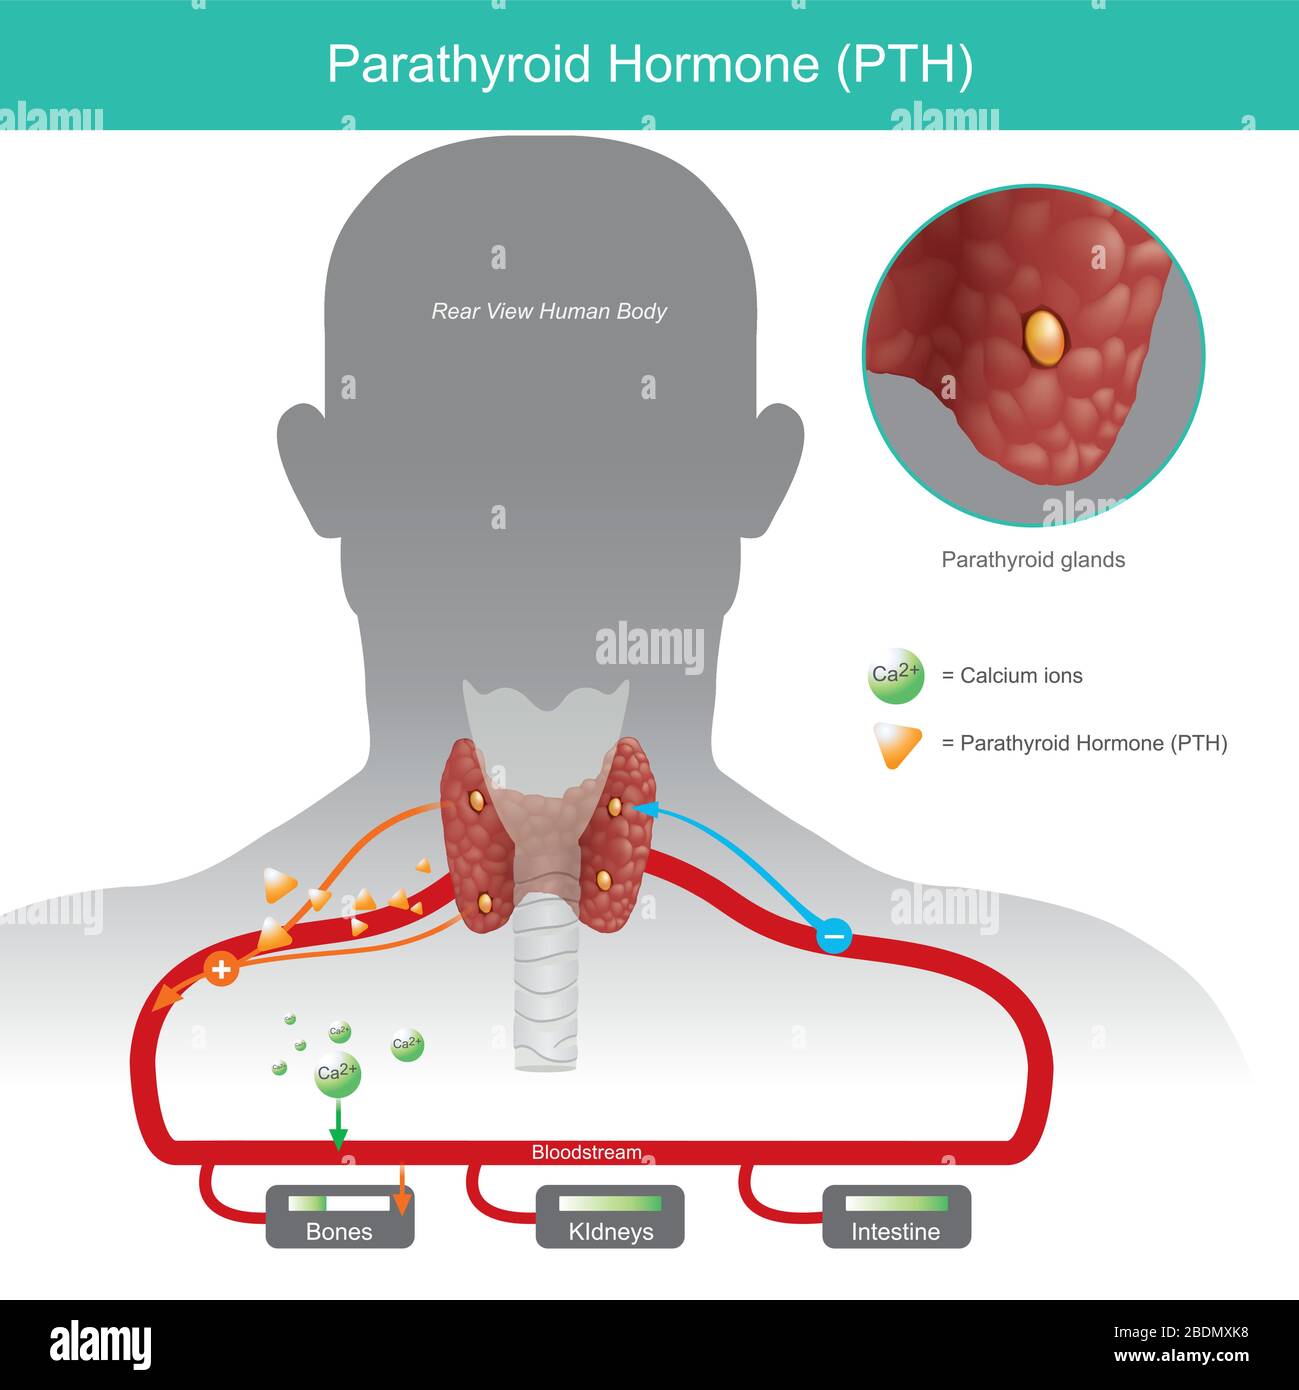 Parathyroid Hormone. it is working control calcium levels in the blood stream by increasing when Parathyroid hormone (PTH) are low level. Illustration Stock Vector